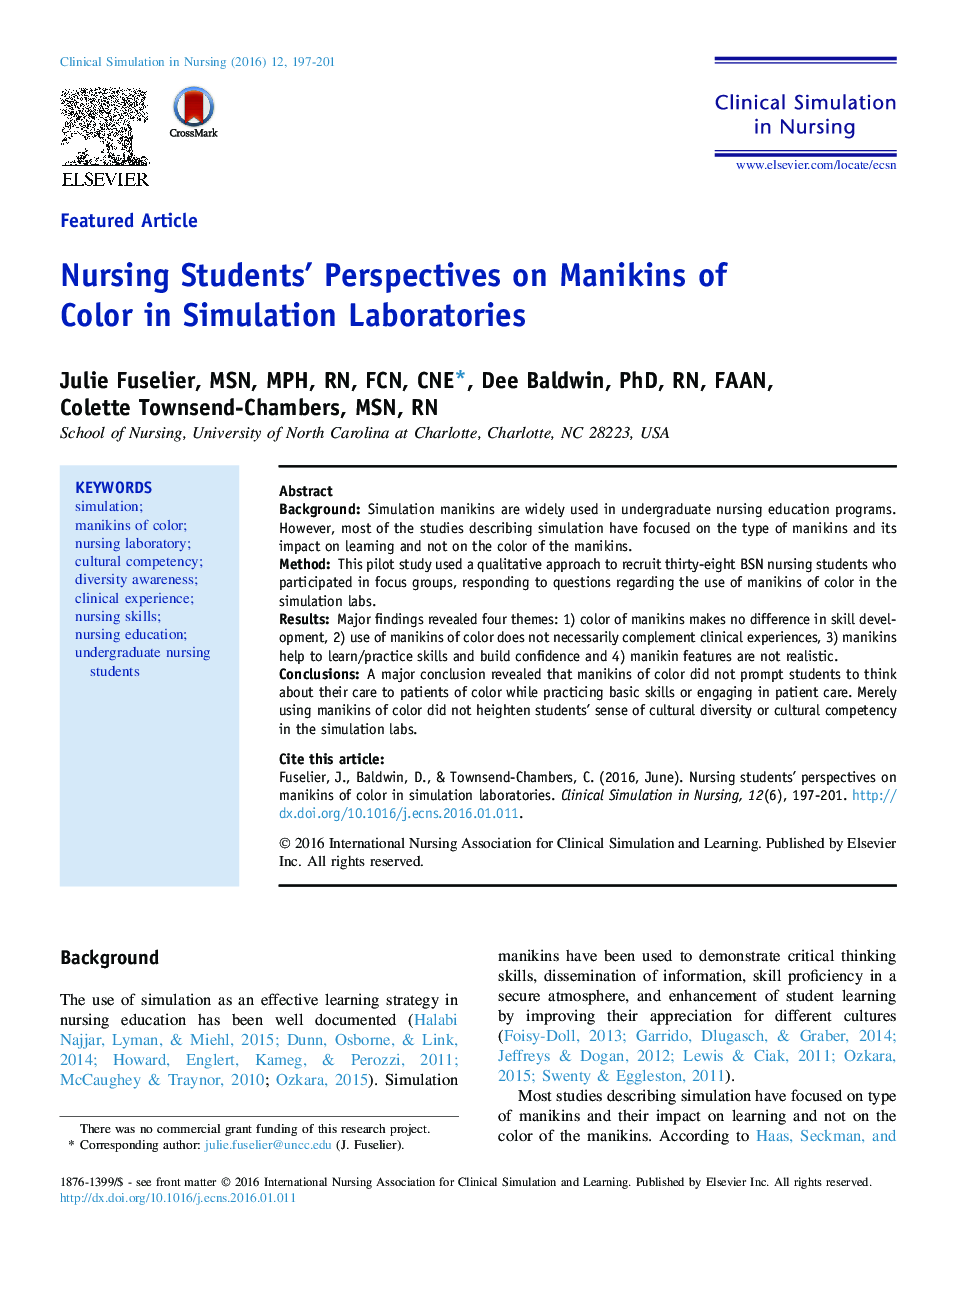 Nursing Students' Perspectives on Manikins of Color in Simulation Laboratories 